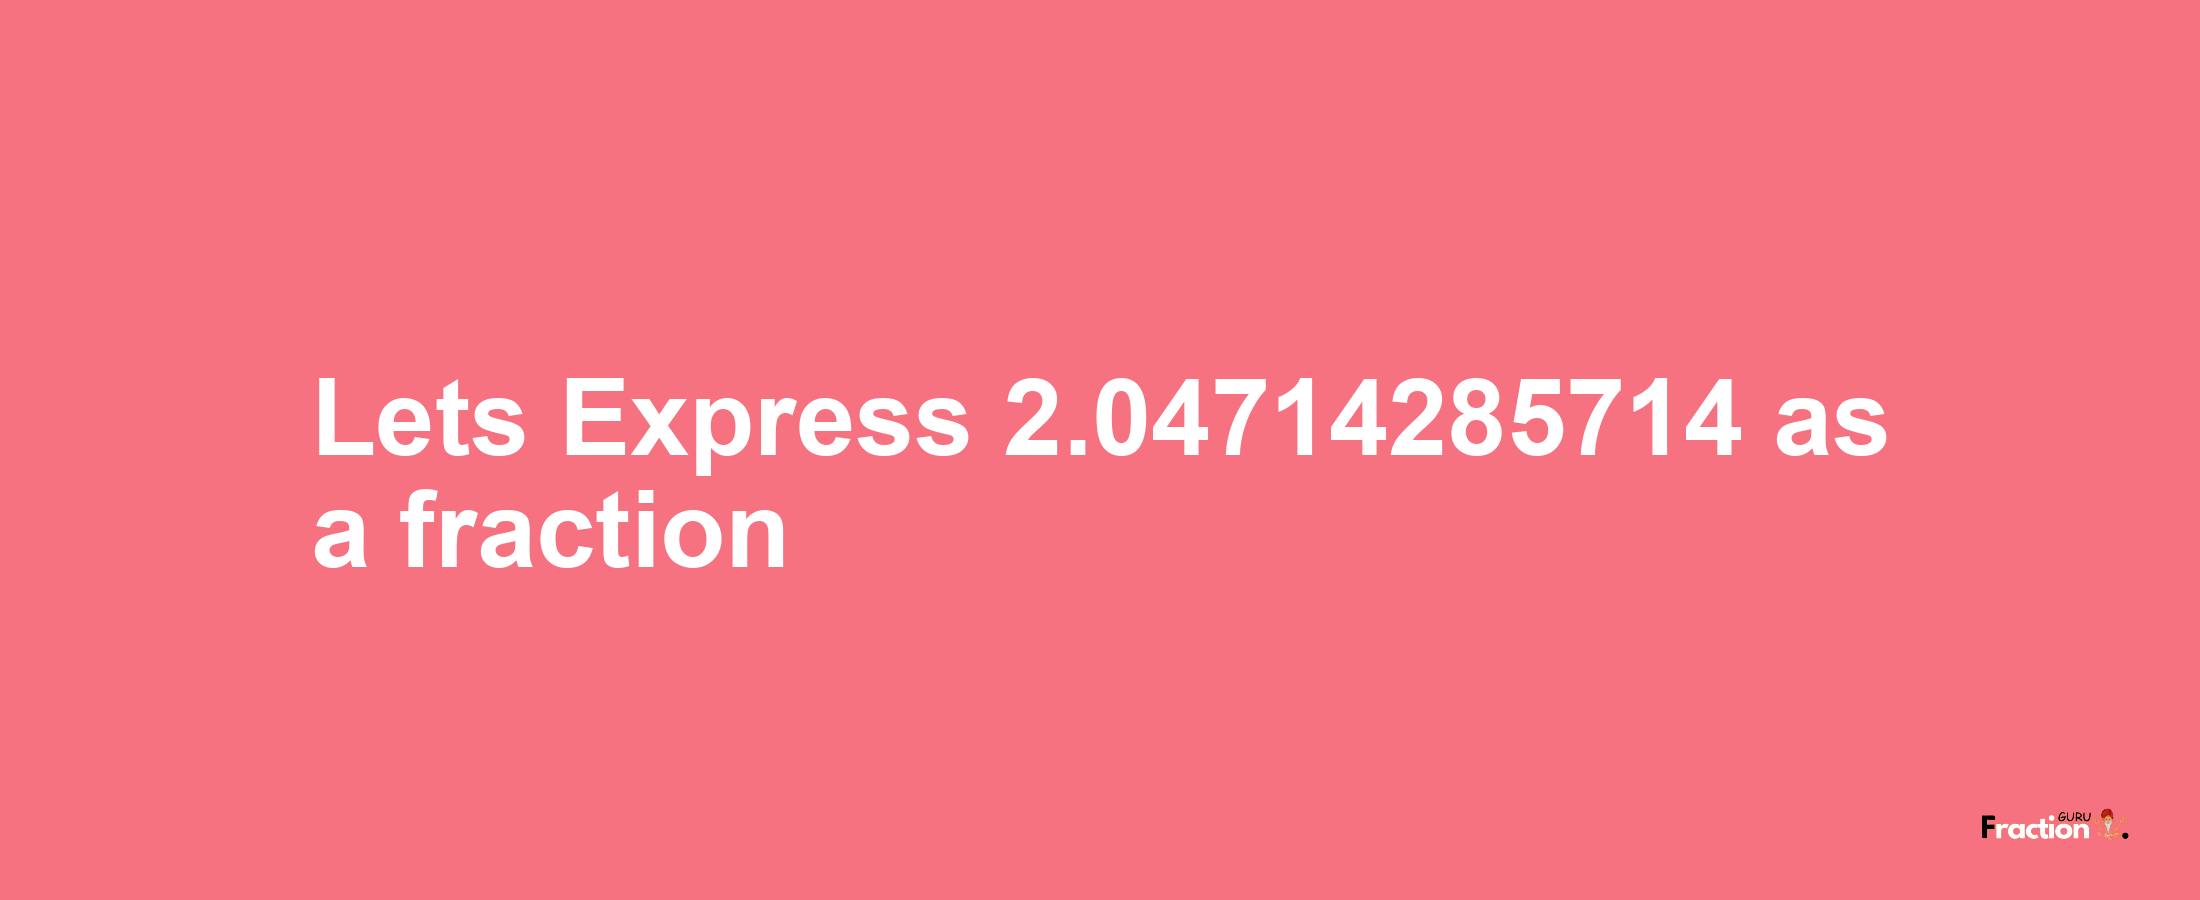 Lets Express 2.04714285714 as afraction